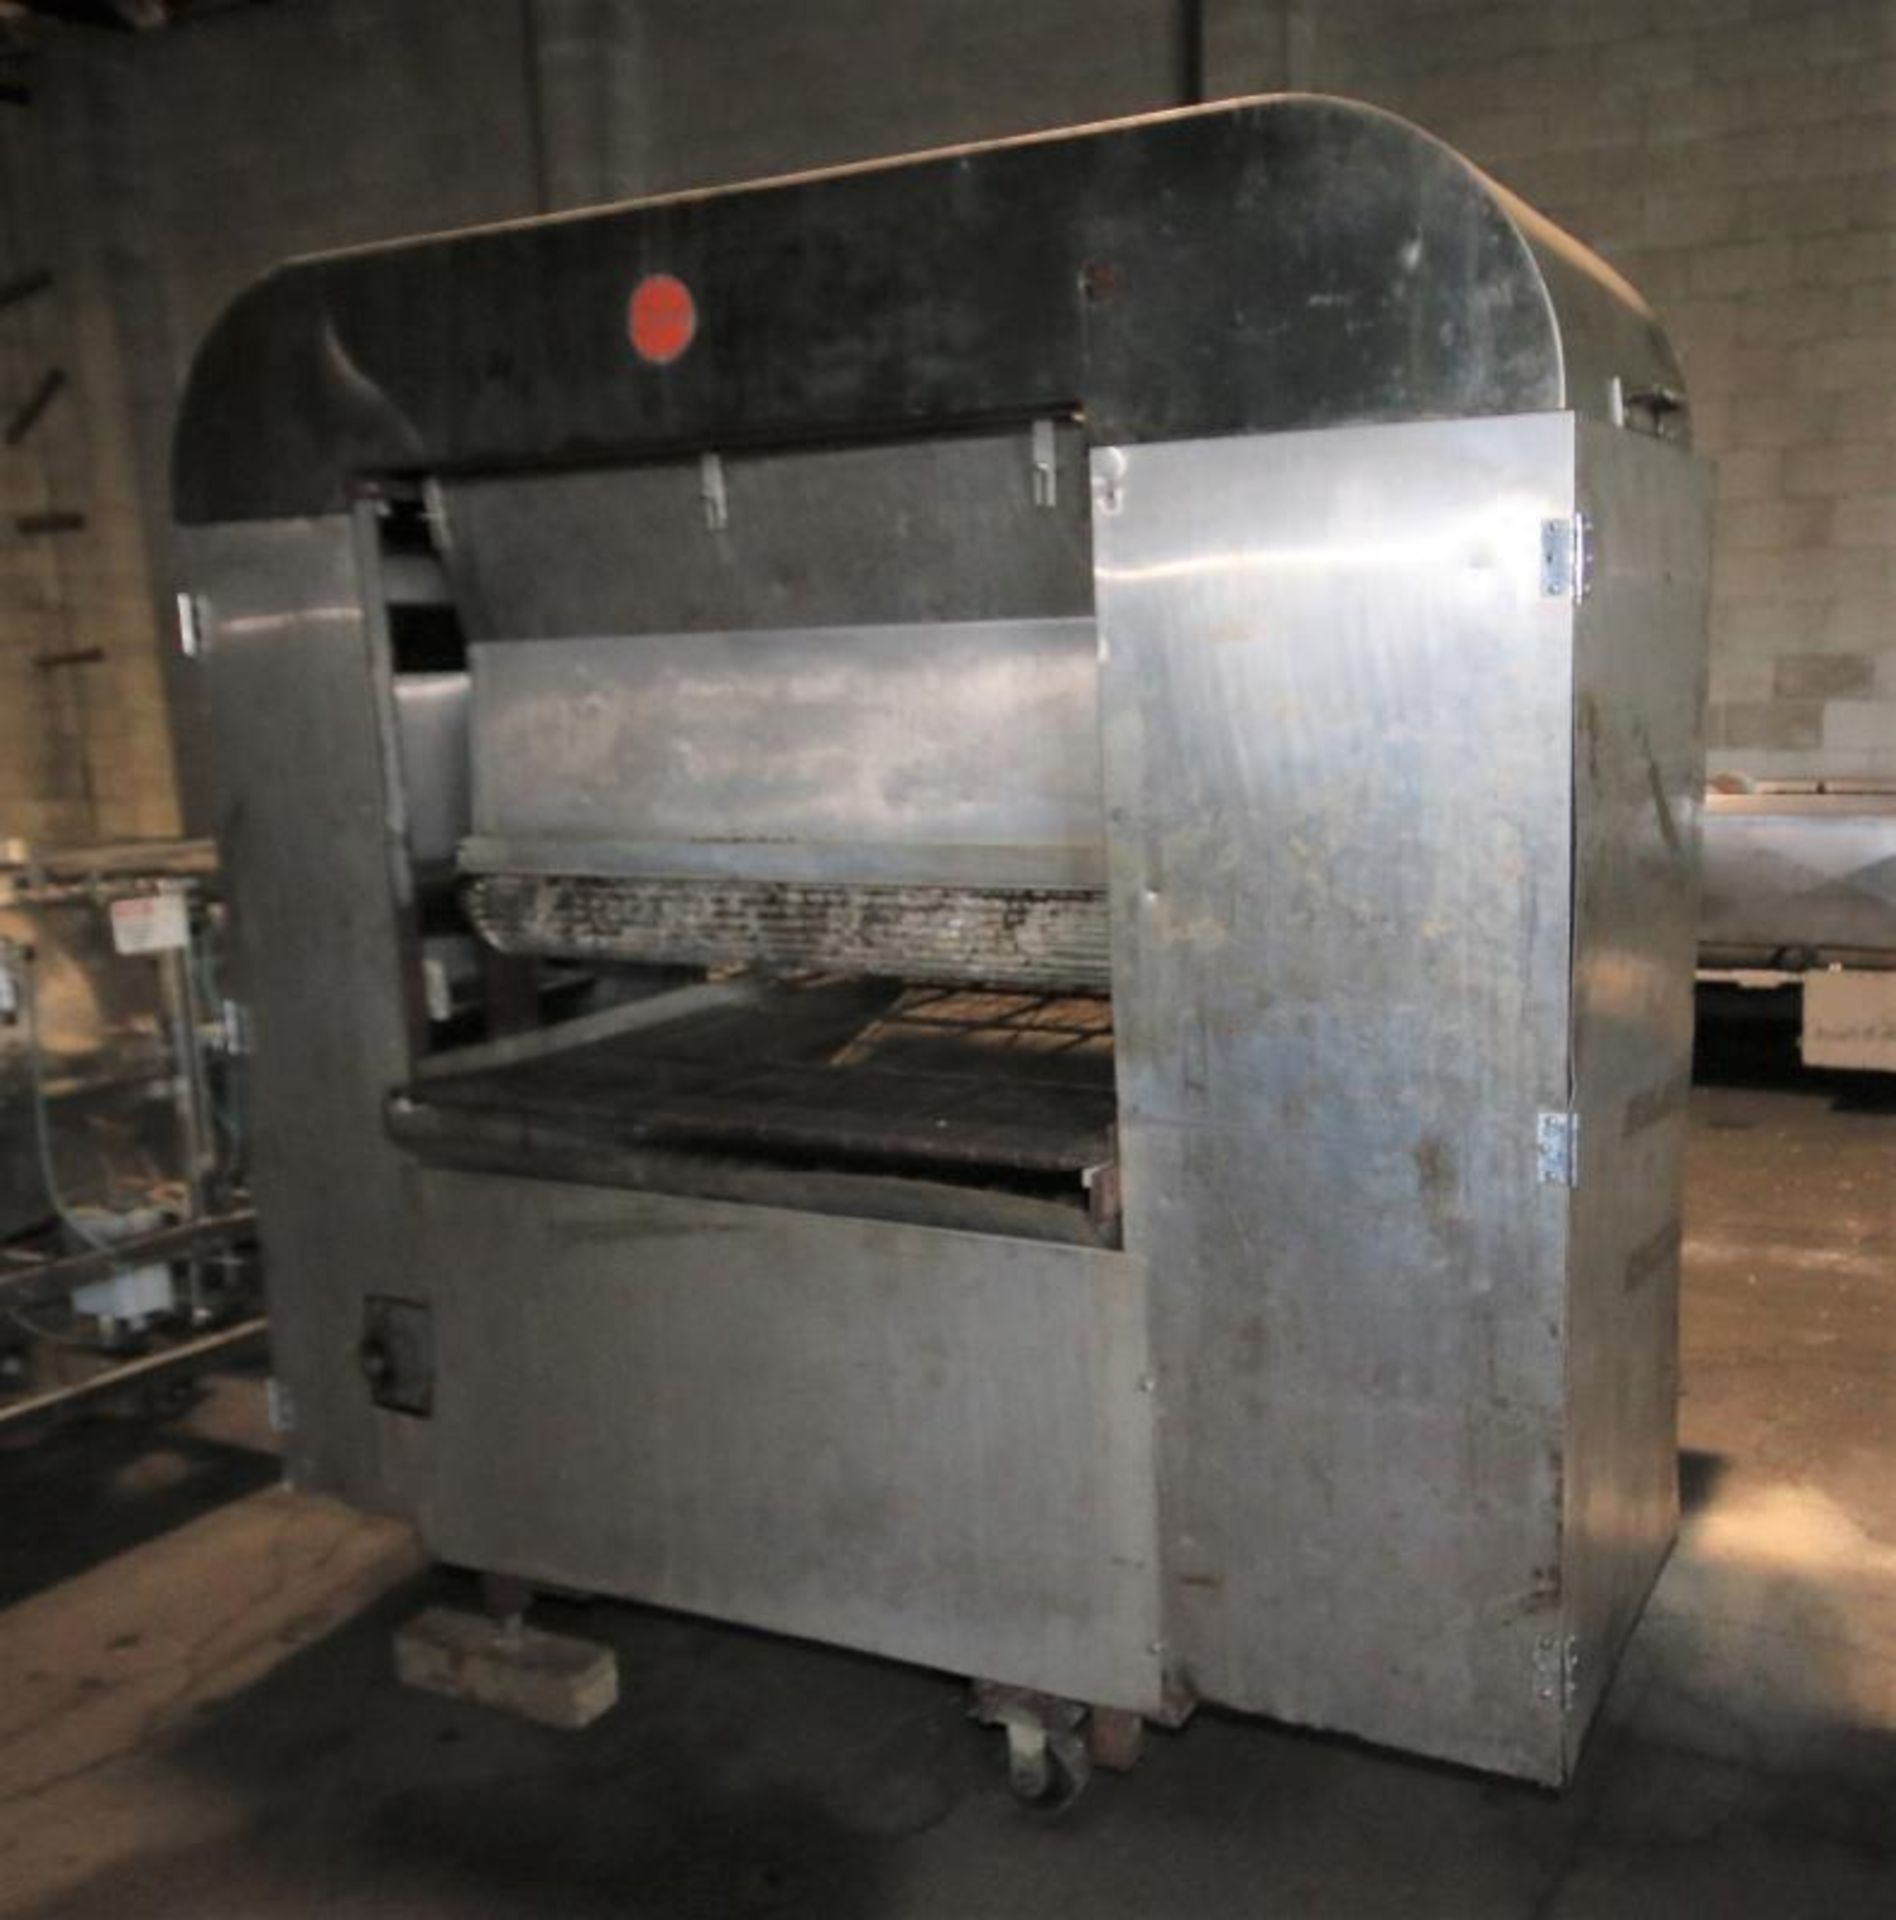 Oates S/S Depositor with 42" W Belt (Located at the MDG Auction Showroom in Pittsburgh, PA) - Image 3 of 4